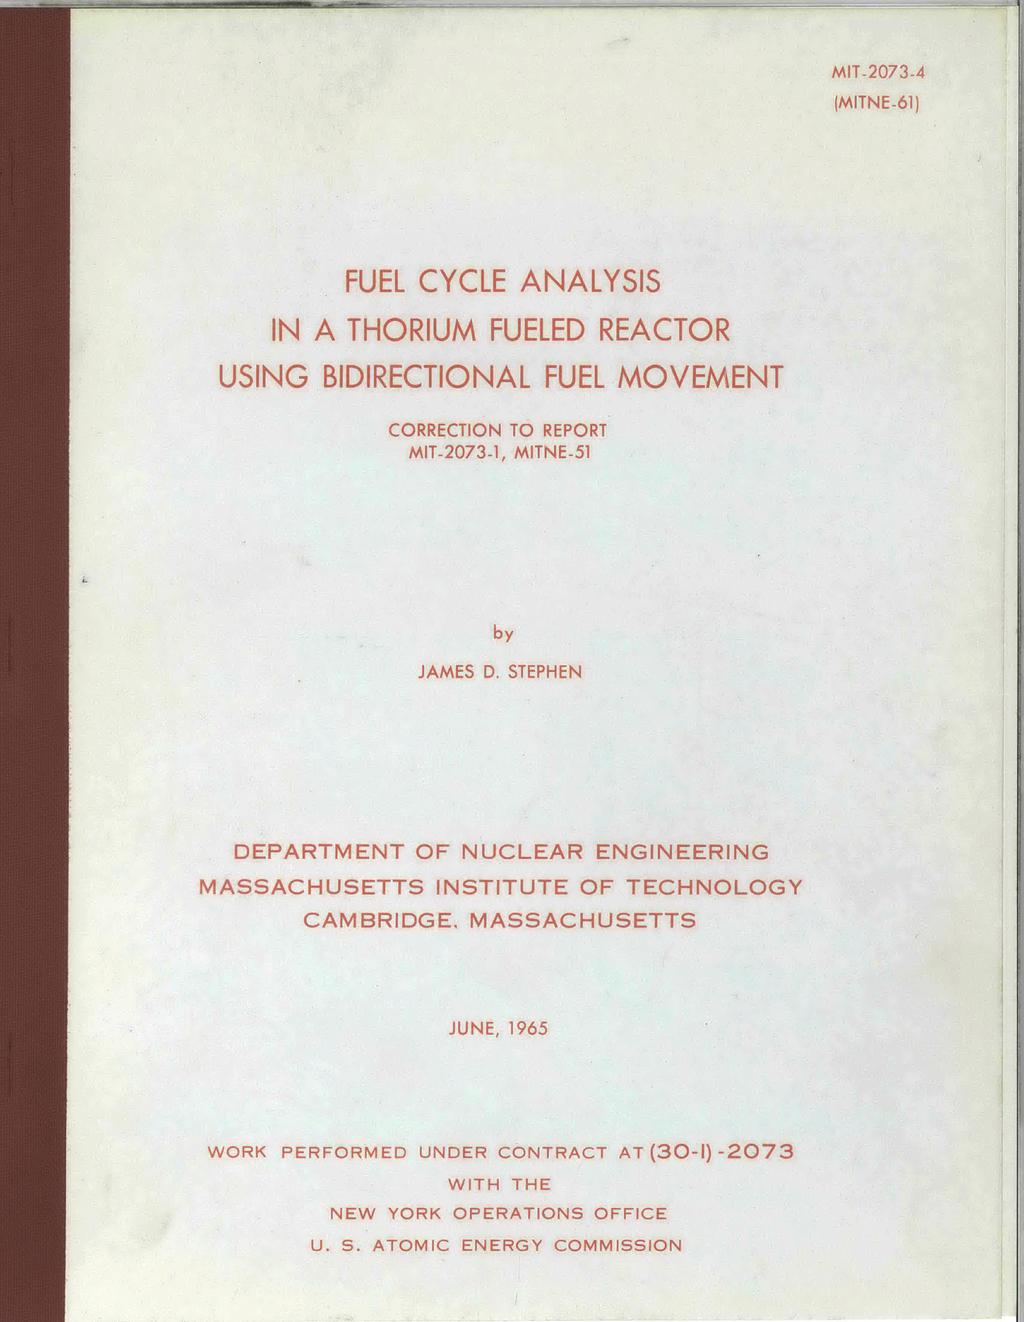 (MITNE-61) FUEL CYCLE ANALYSIS IN A THORIUM FUELED REACTOR USING BIDIRECTIONAL FUEL MOVEMENT CORRECTION TO REPORT MIT-273-1, MITNE-51 by JAMES D.